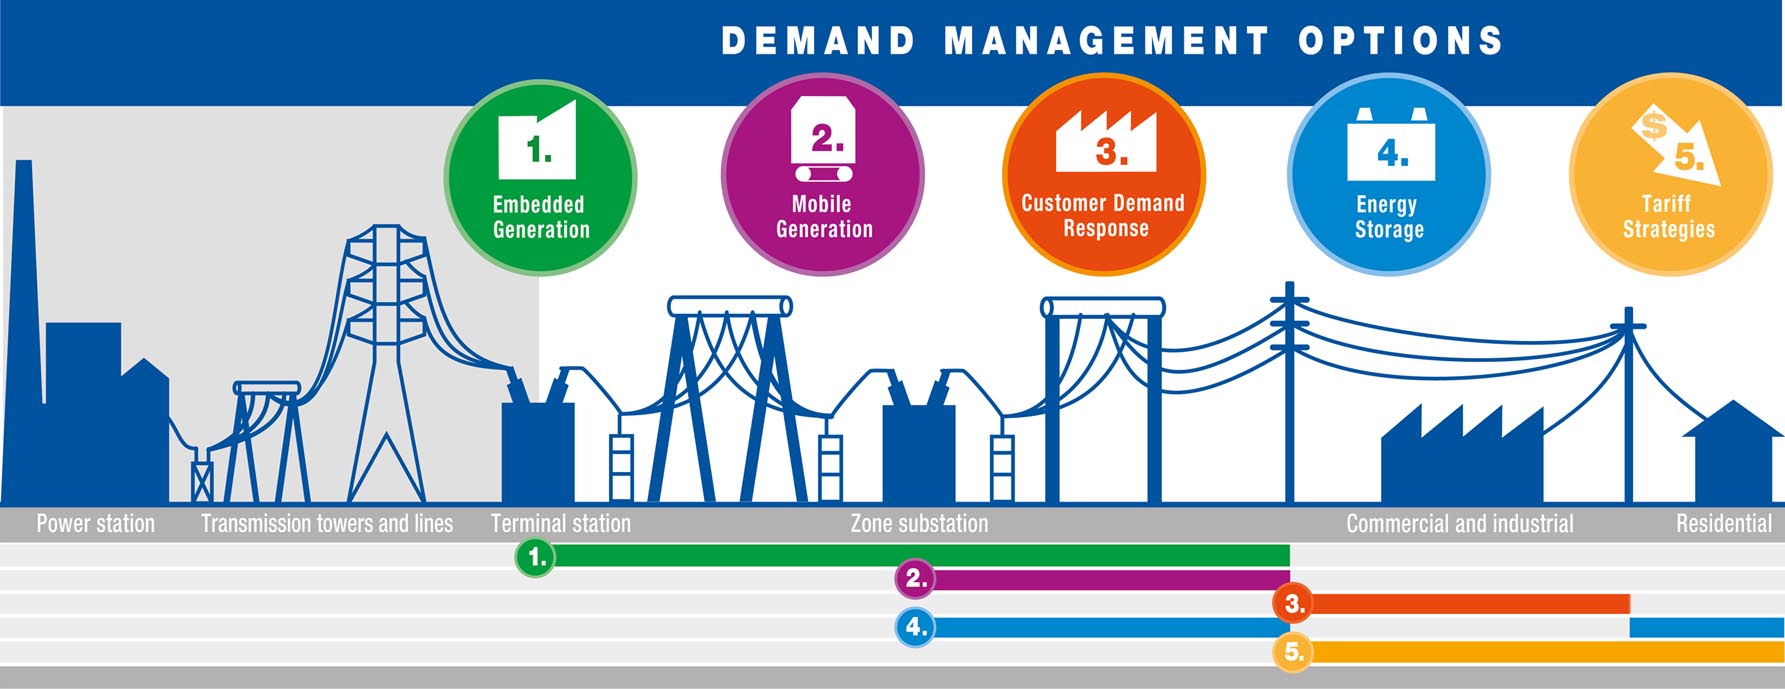 Diagram of five demand management options, see text version for details.